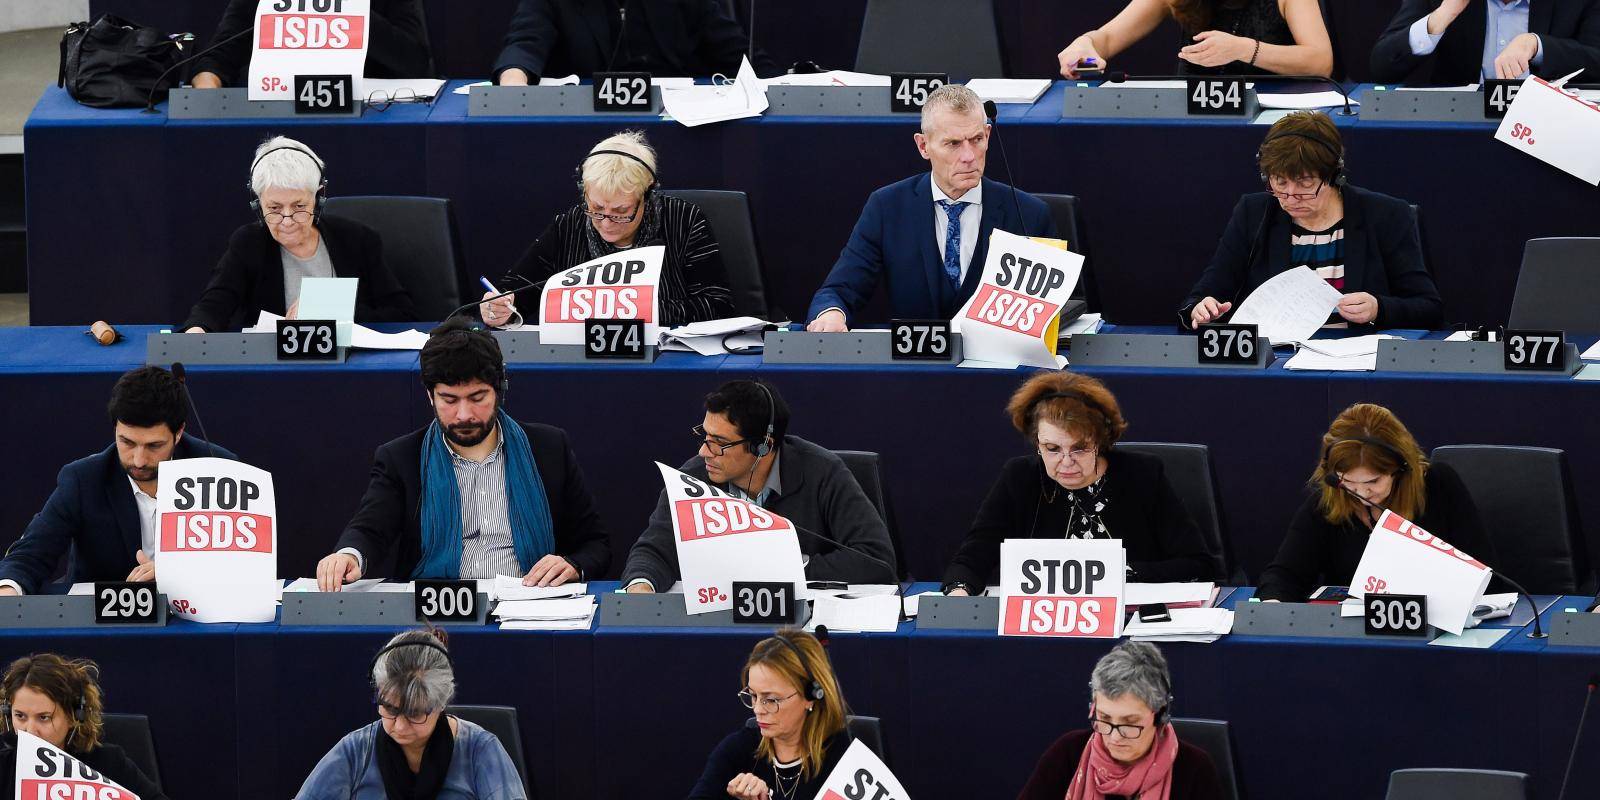 Members of the European Parliament hold panels reading ‘Stop ISDS’ at the European Parliament in Strasbourg 